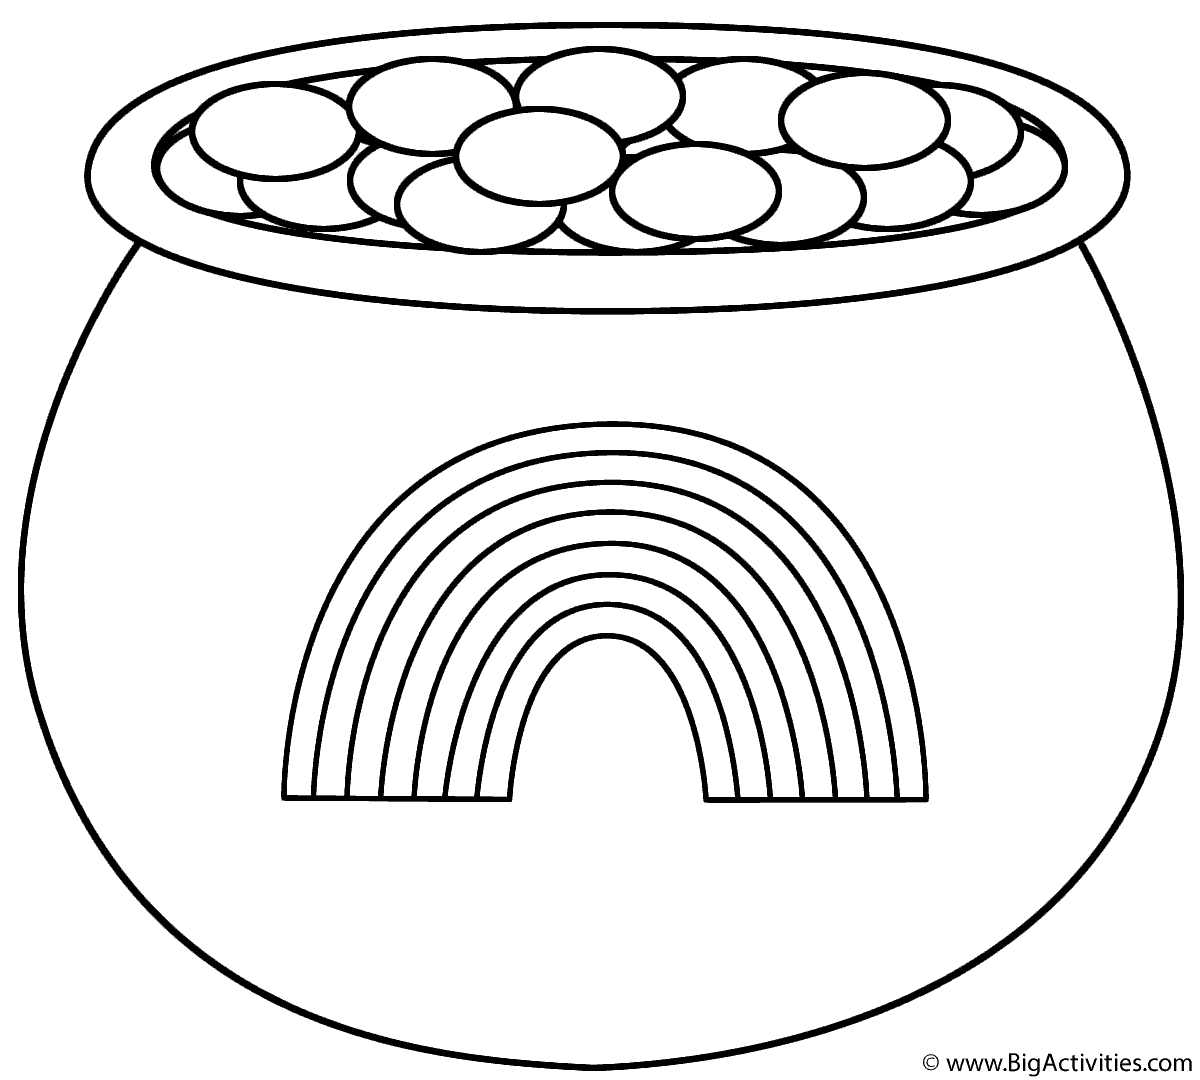 rainbow coloring pages with pot of gold - photo #22